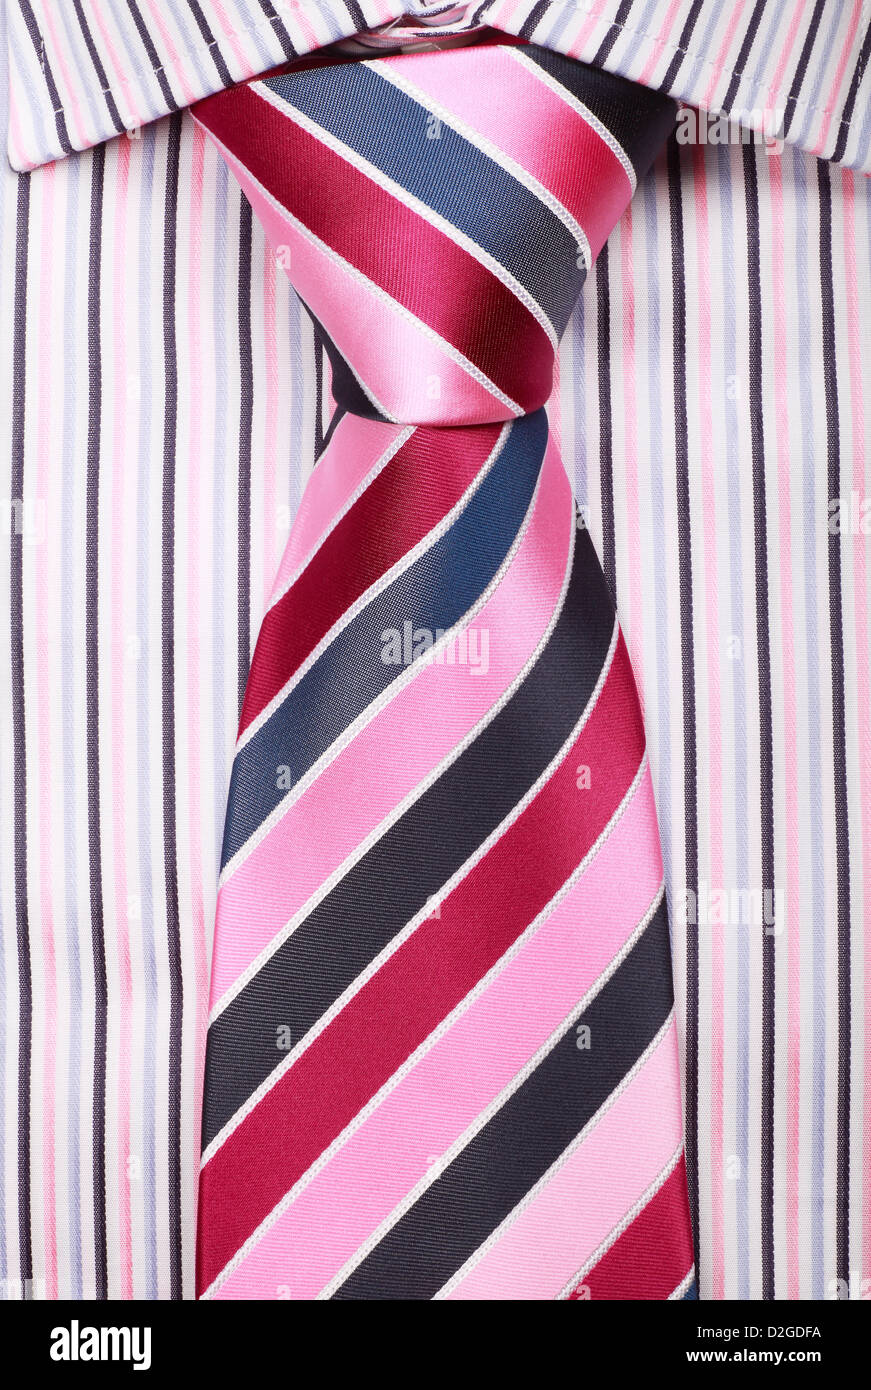 New shirt and tie Stock Photo